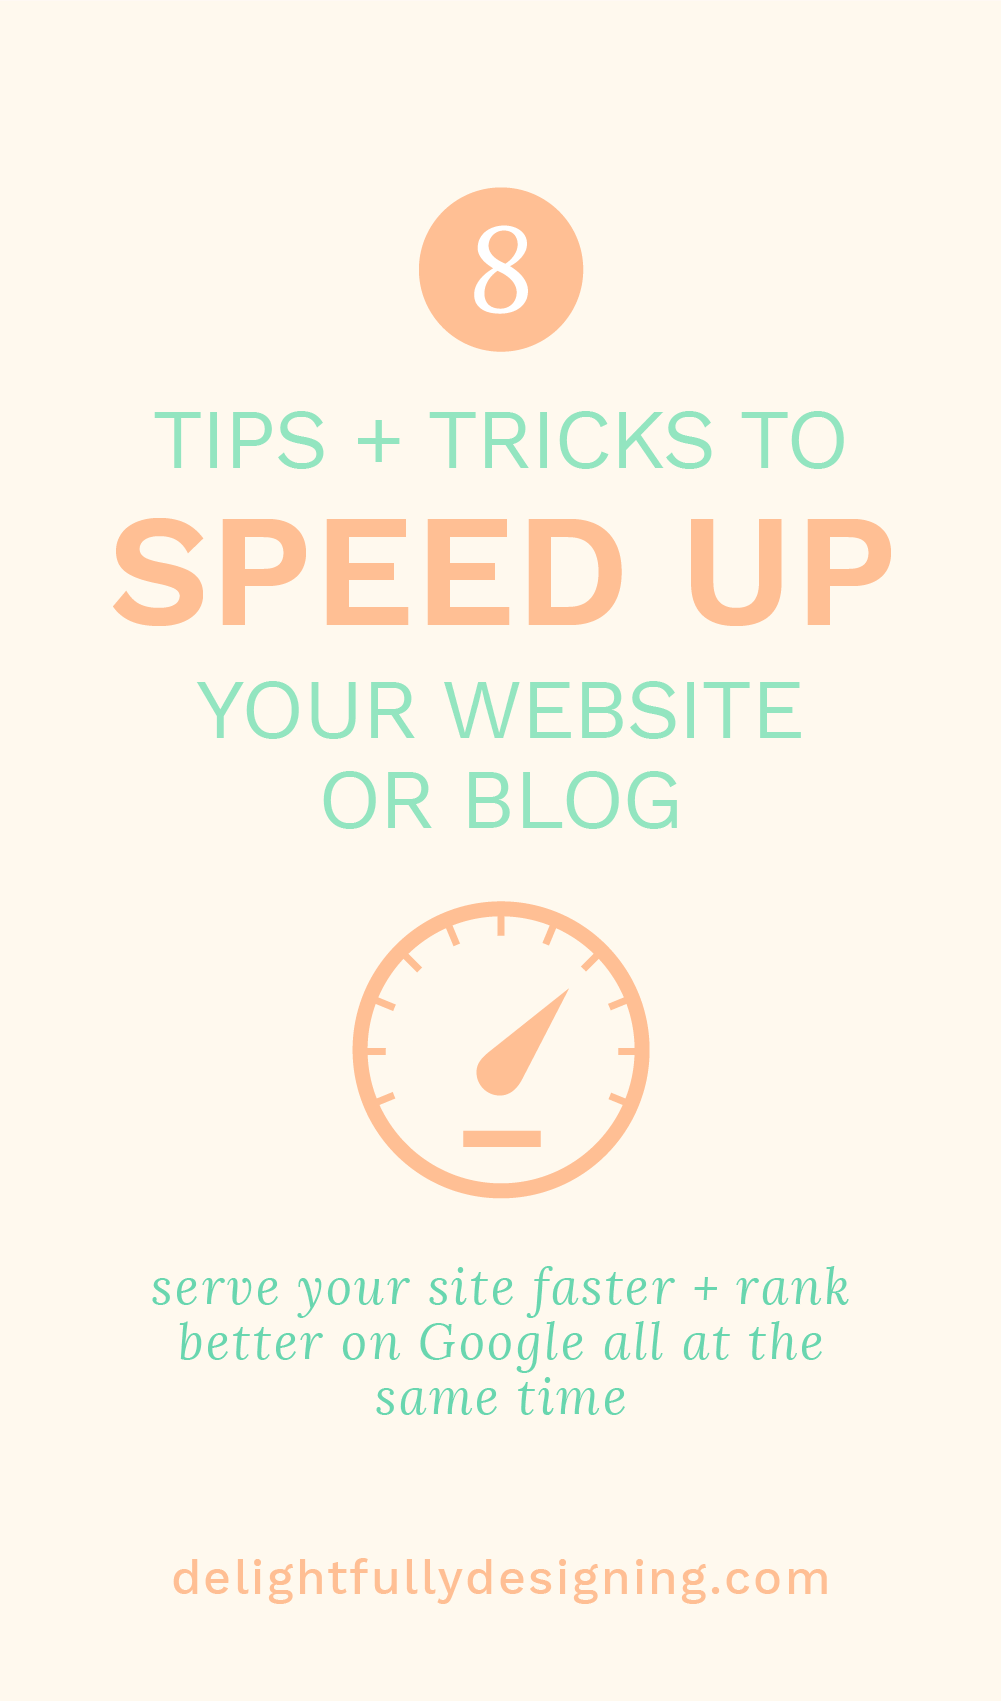 speed up your website, how to speed up your website, speed up your website, speed up your wordpress website, optimizing your website speed